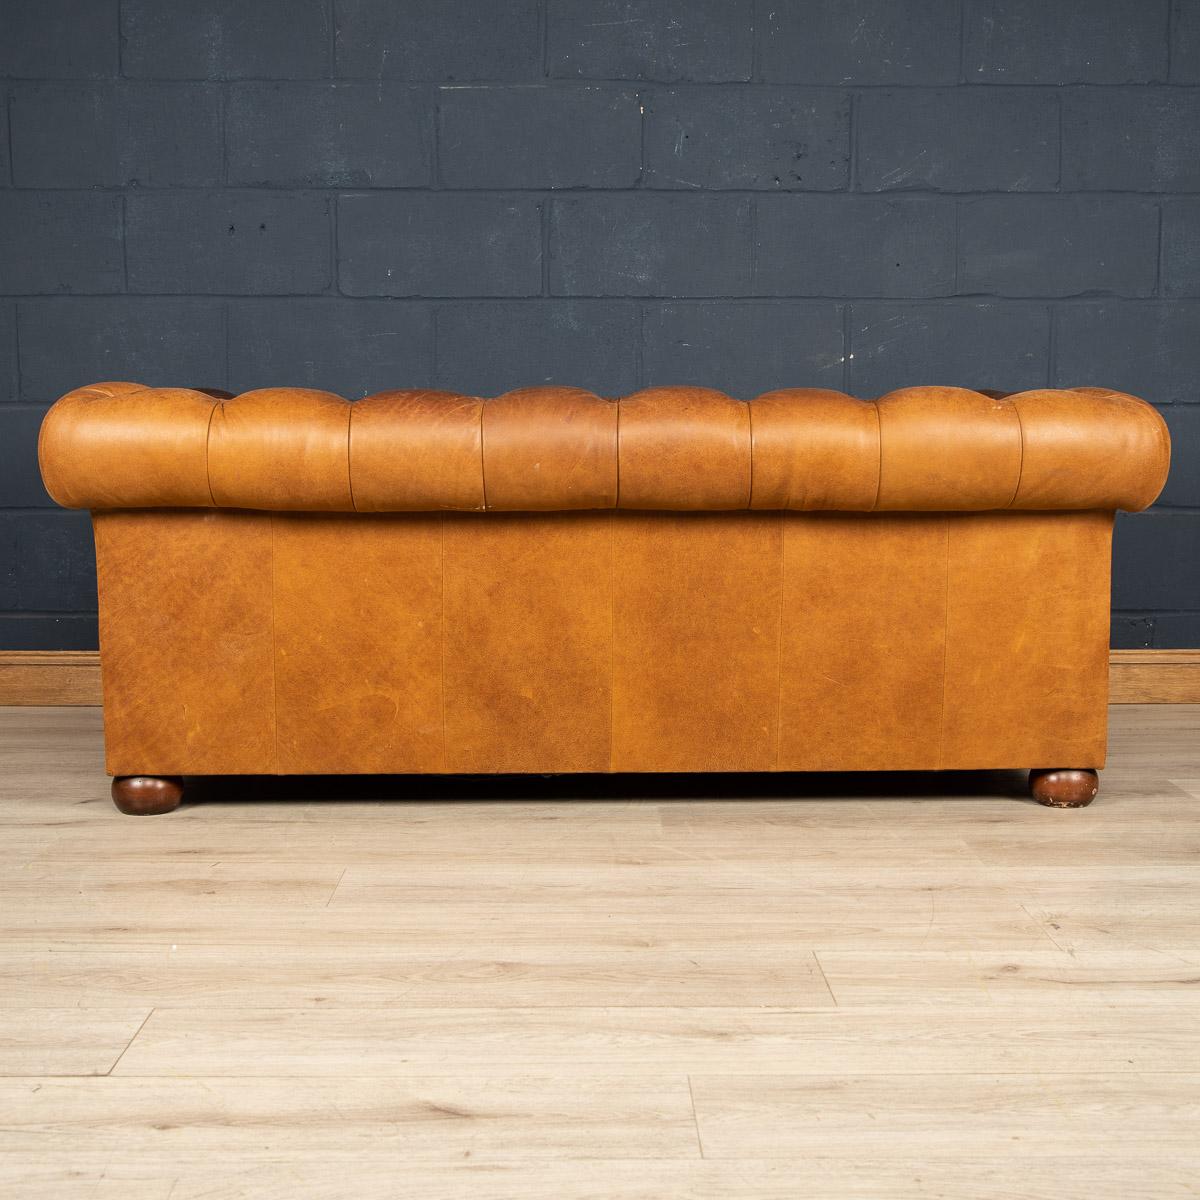 Pair of 20th Century Chesterfield Leather Sofas By Laura Ashley, c.1970 2